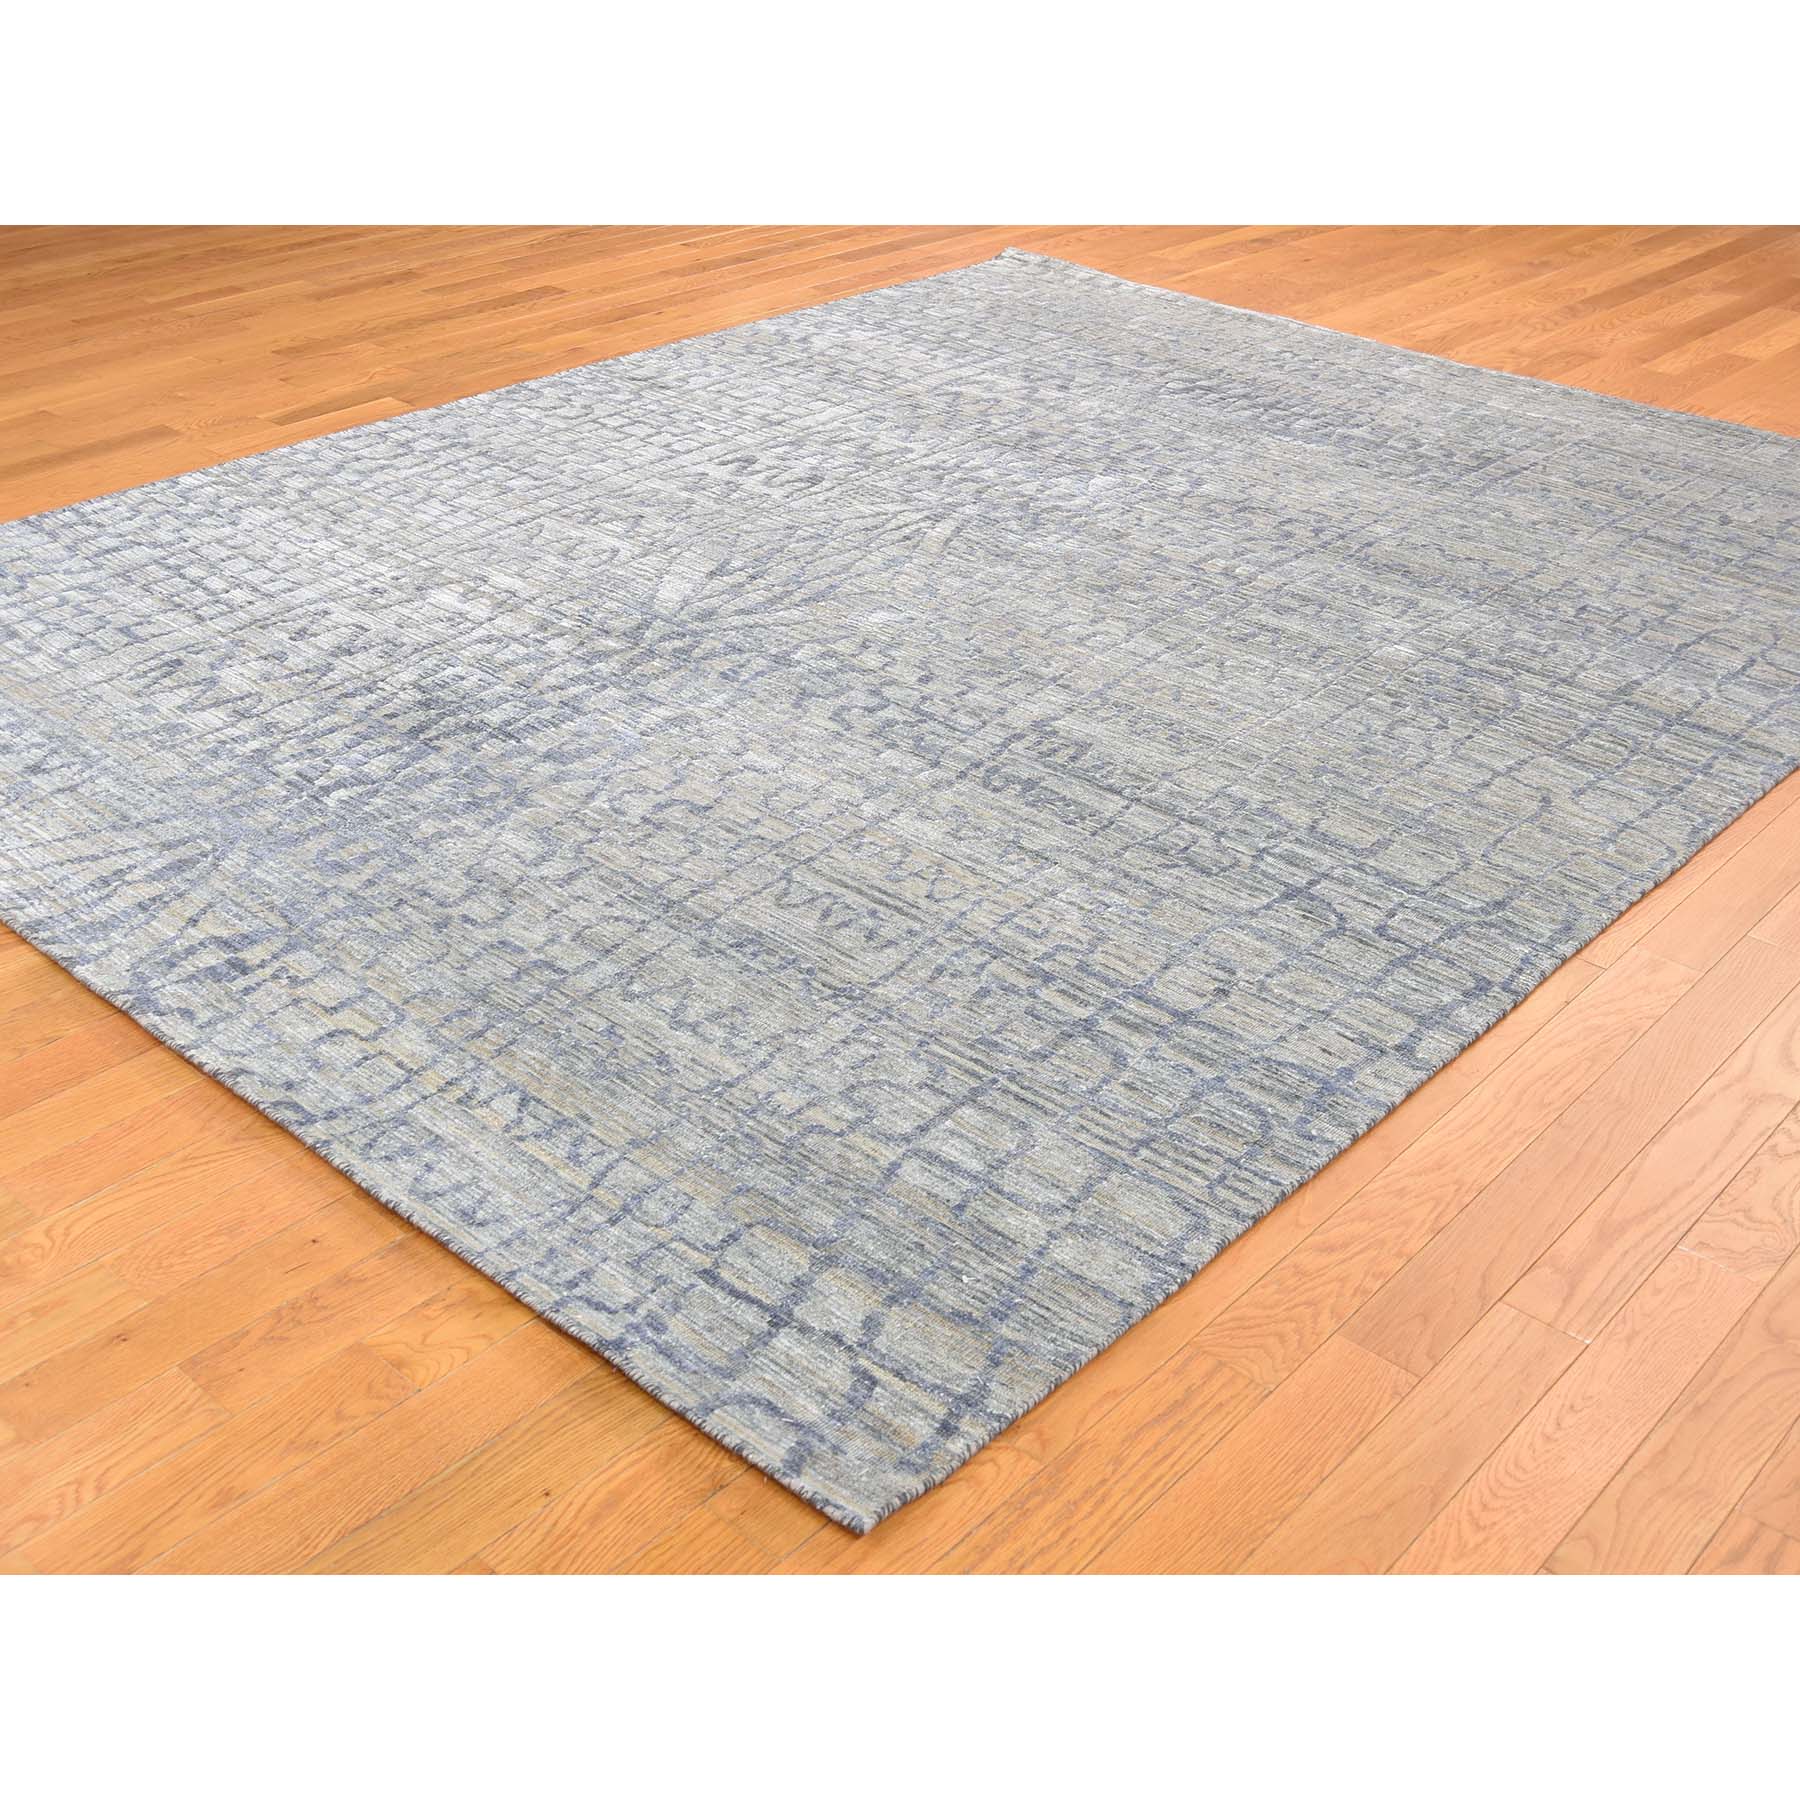 8-x10-1  THE ERASED MOROCCAN Silk with Textured Wool Hand-Knotted Oriental Rug 